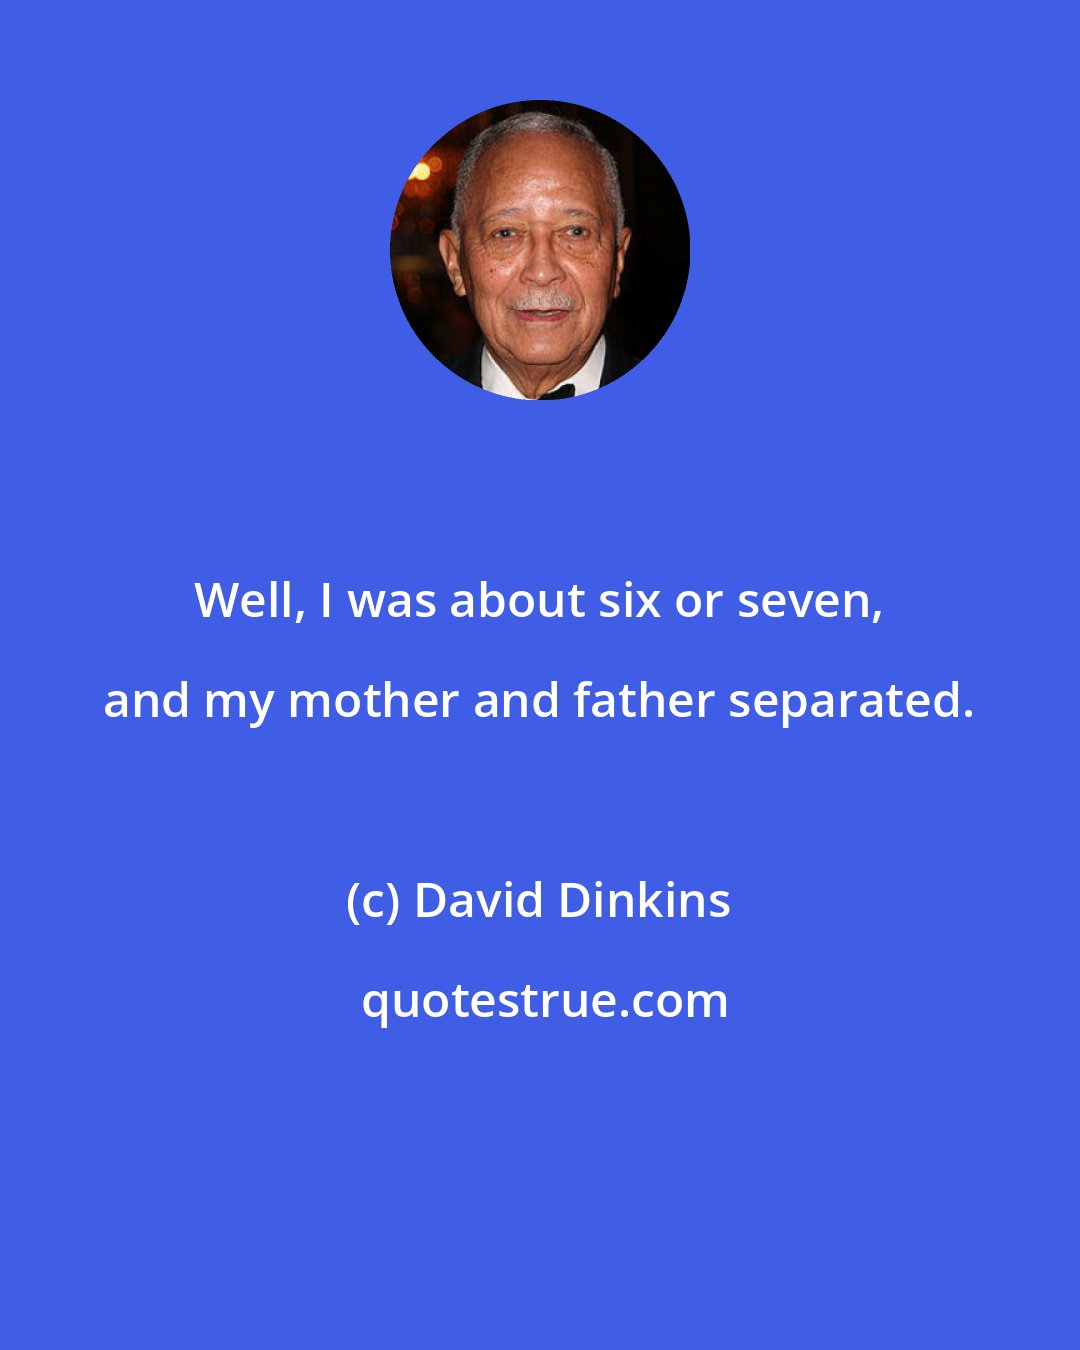 David Dinkins: Well, I was about six or seven, and my mother and father separated.